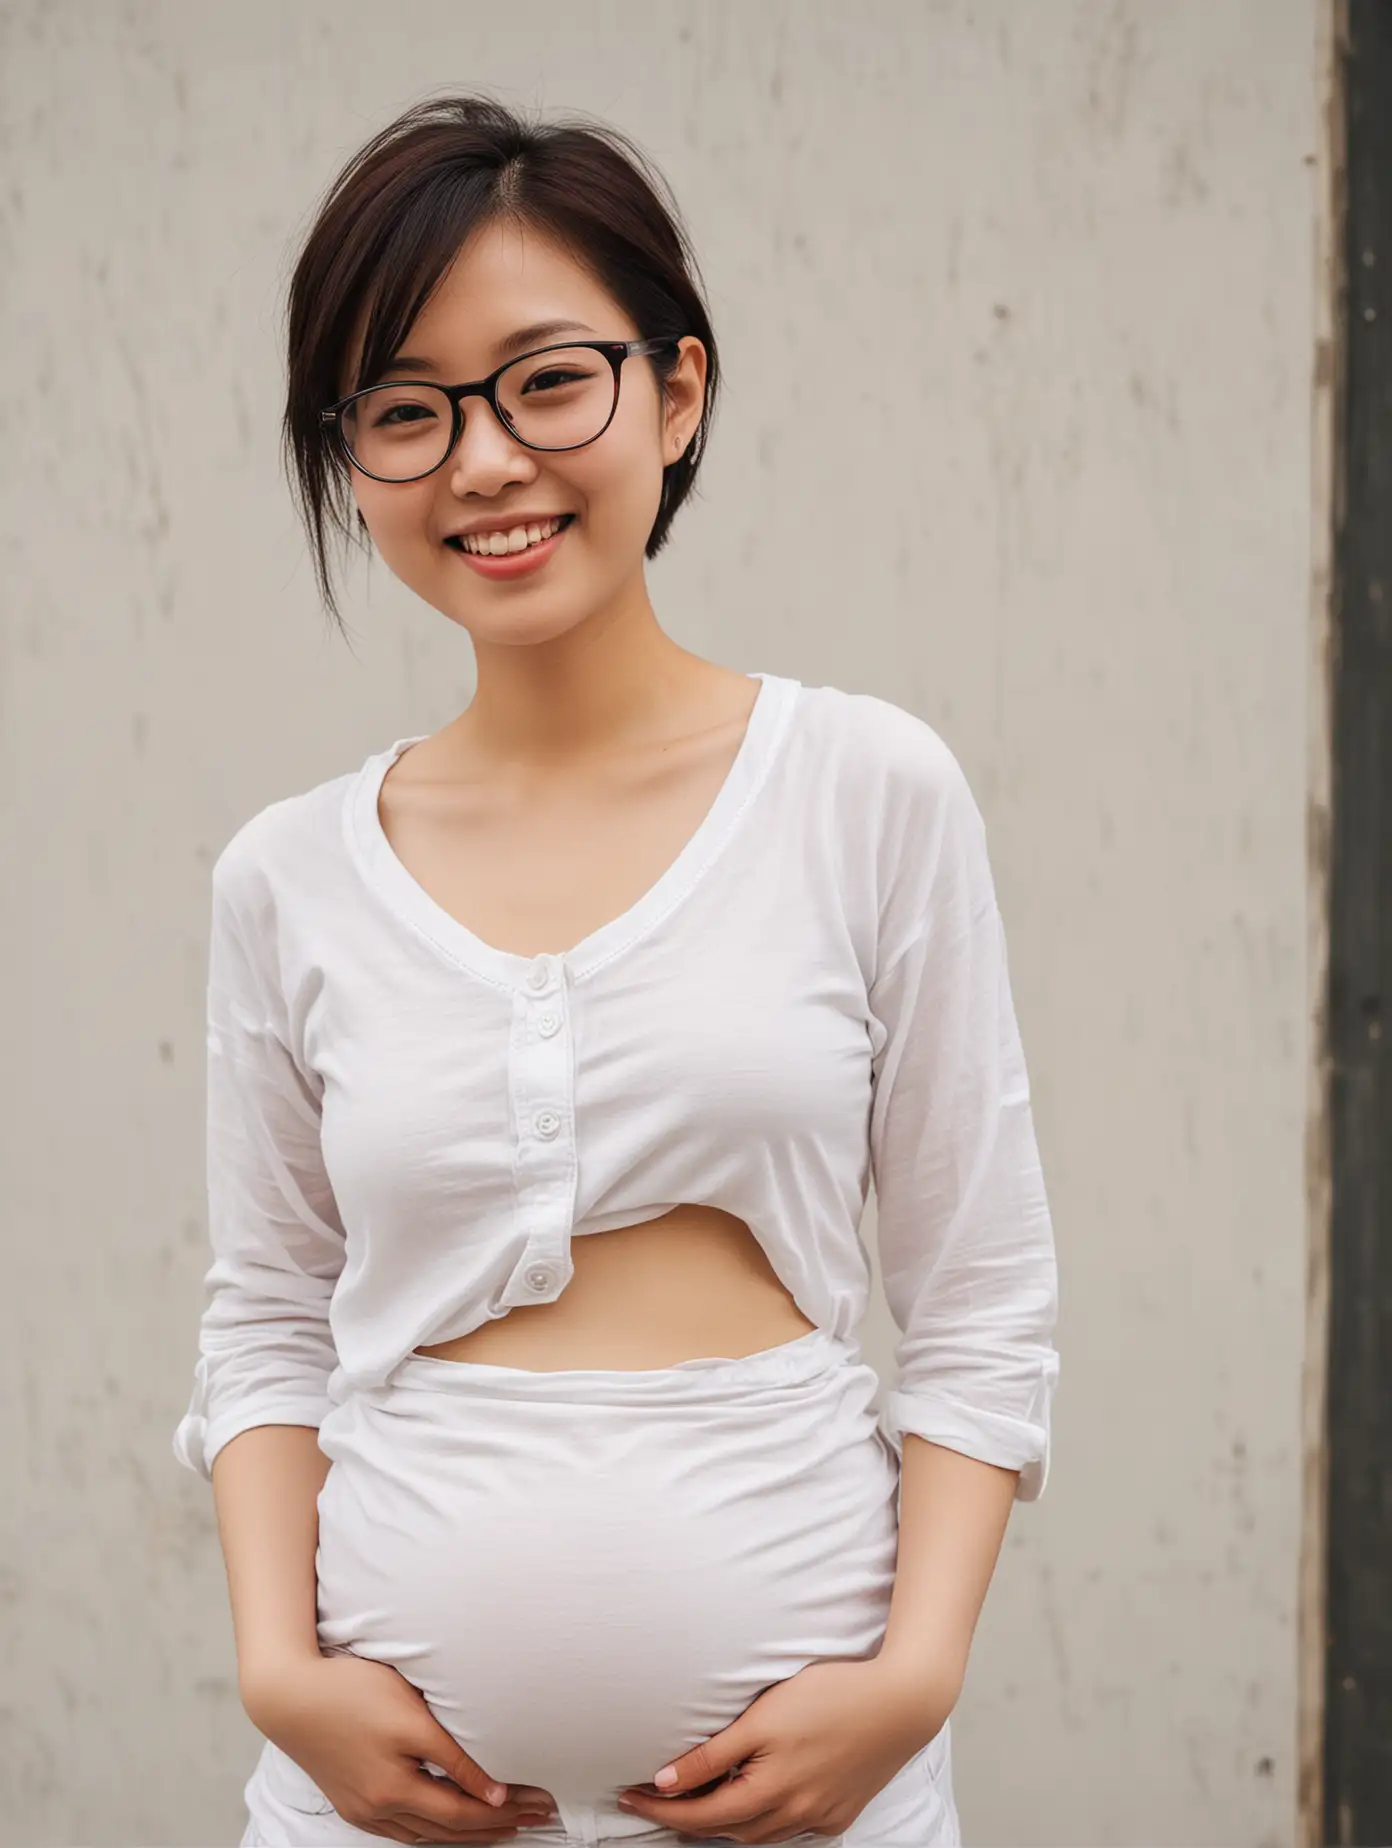 Chinese girl, pregnant, bulged belly, wearing white clothes, wearing glasses, short hair, sunny smile, side profile